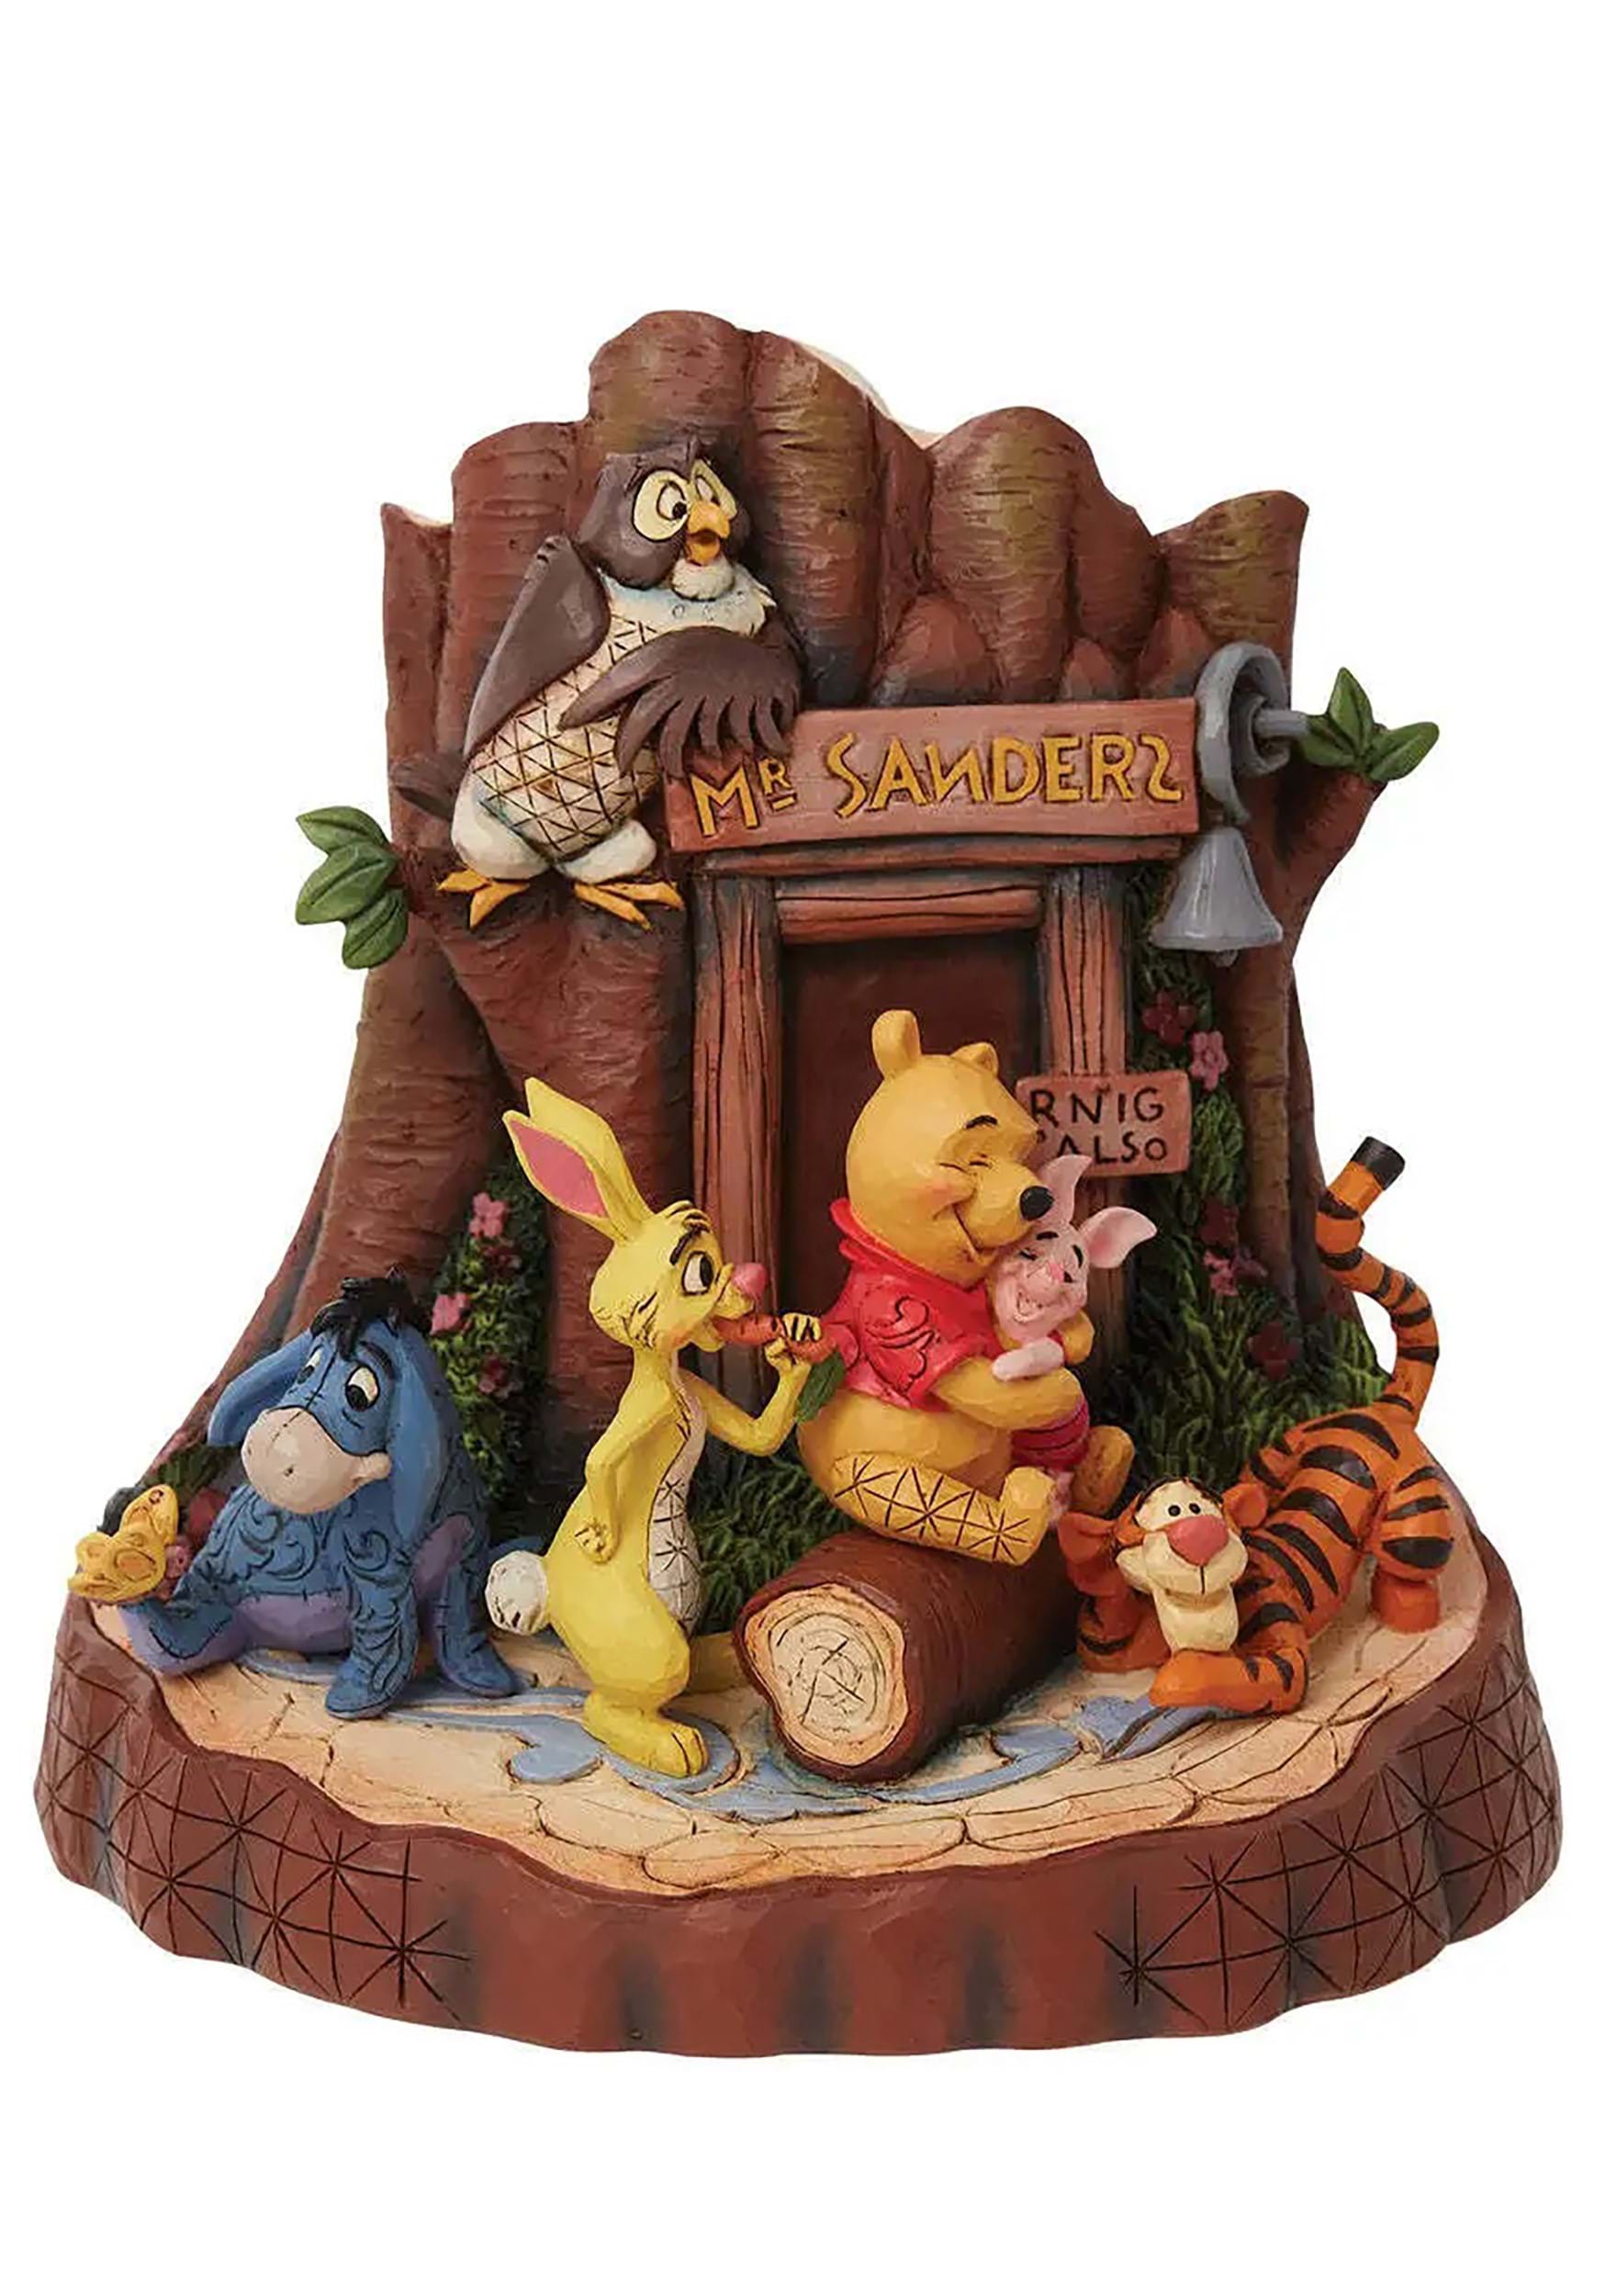 Jim Shore Winnie the Pooh Carved by Heart Diorama Figure